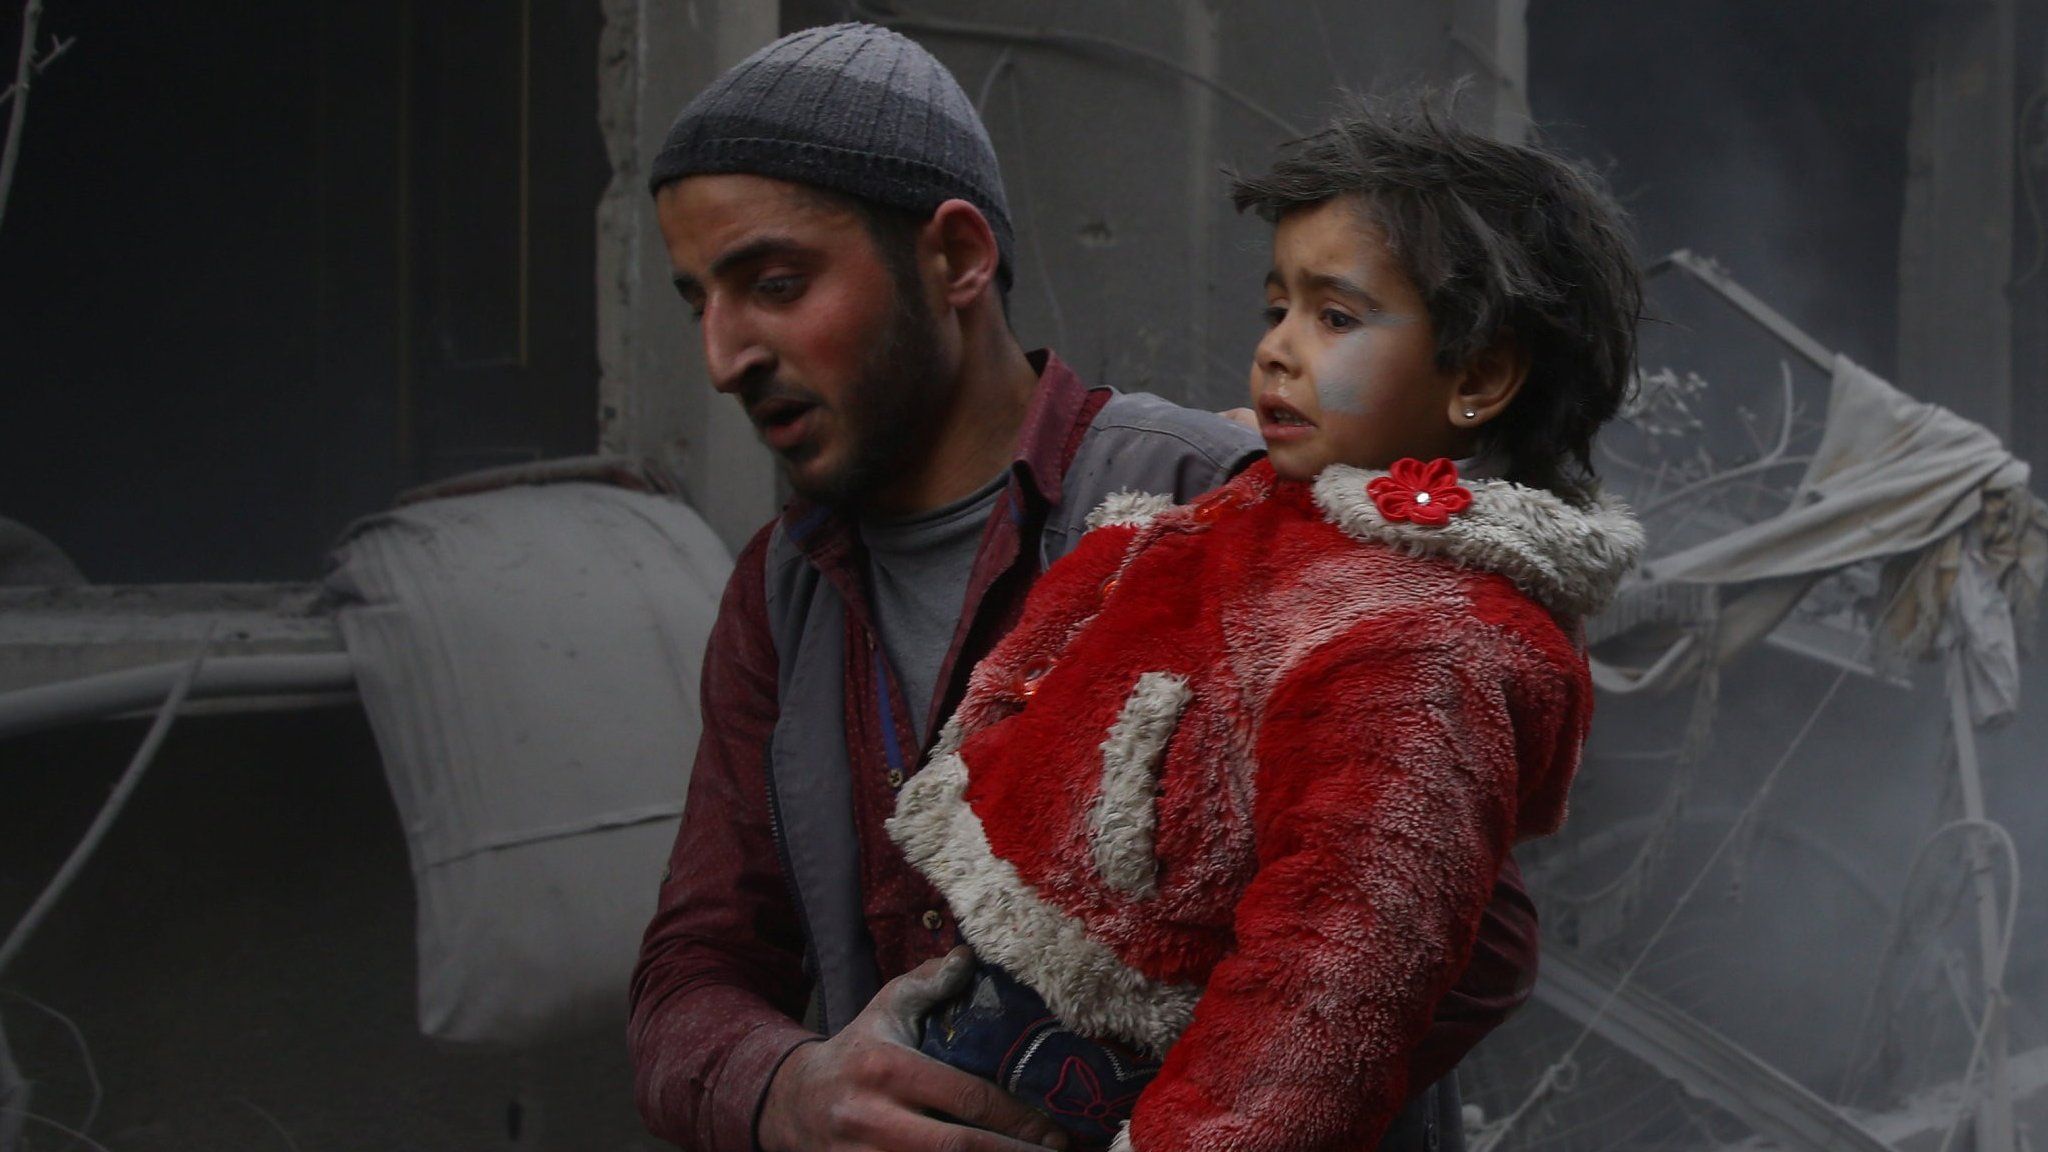 A girl is carried by a rescuer after a reported government air strike on the town of Douma, in the rebel-held Eastern Ghouta near Damascus, Syria (7 February 2018)